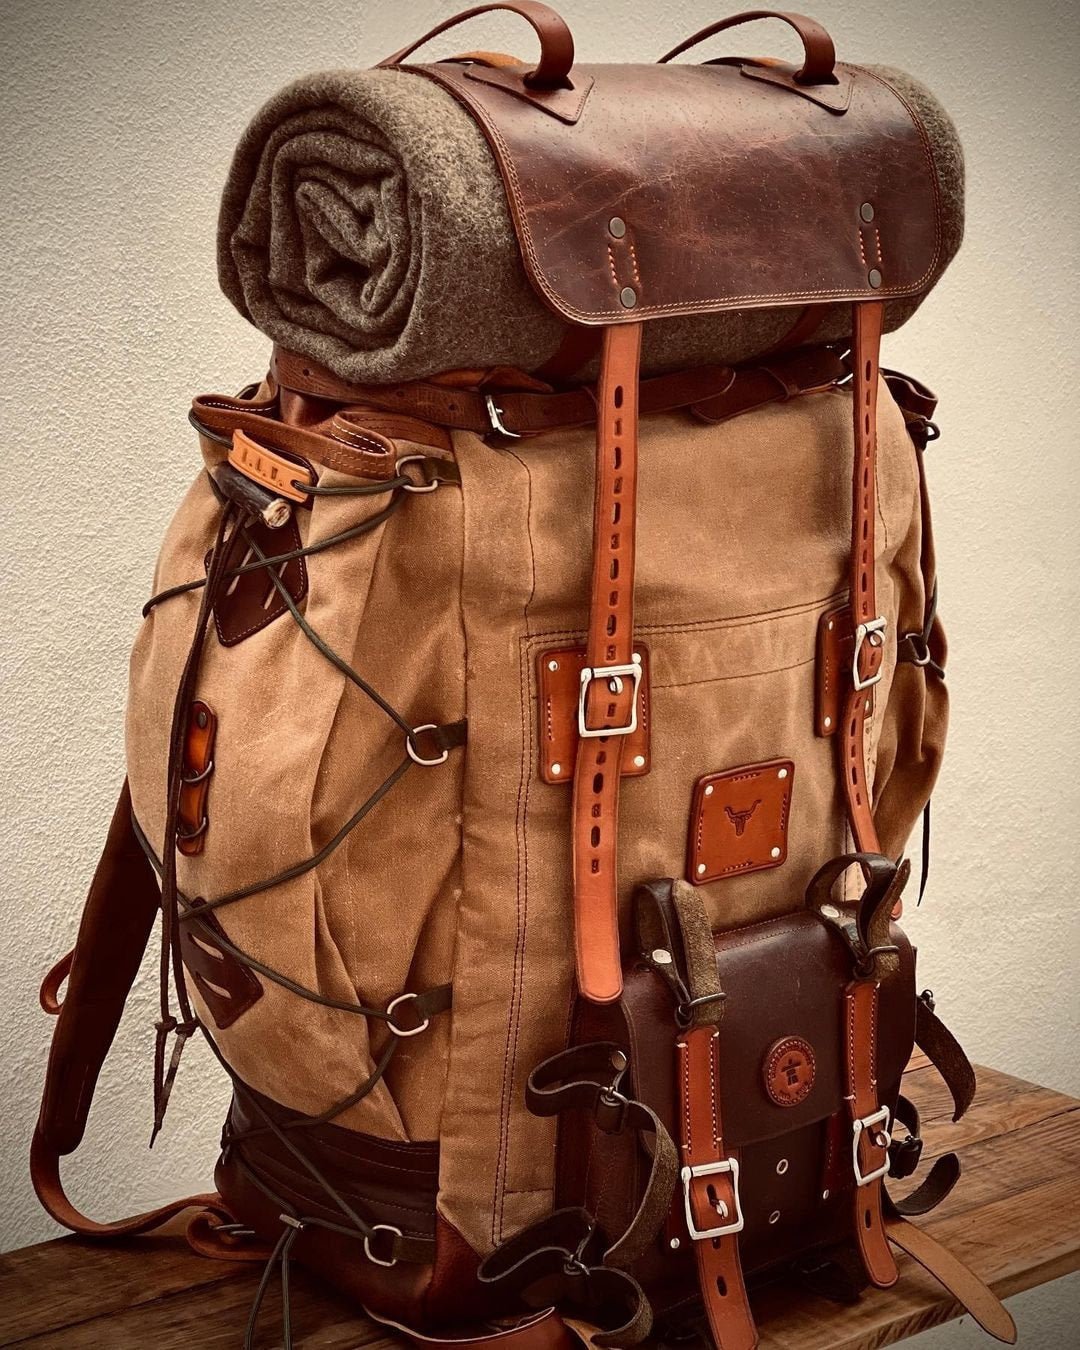 Waxed Canvas and Leather Backpack | 45 L | Handmade Leather, Waxed Backpack for Travel, Camping, Hunting, Hiking | Personalization bushcraft - camping - hiking backpack 99percenthandmade   